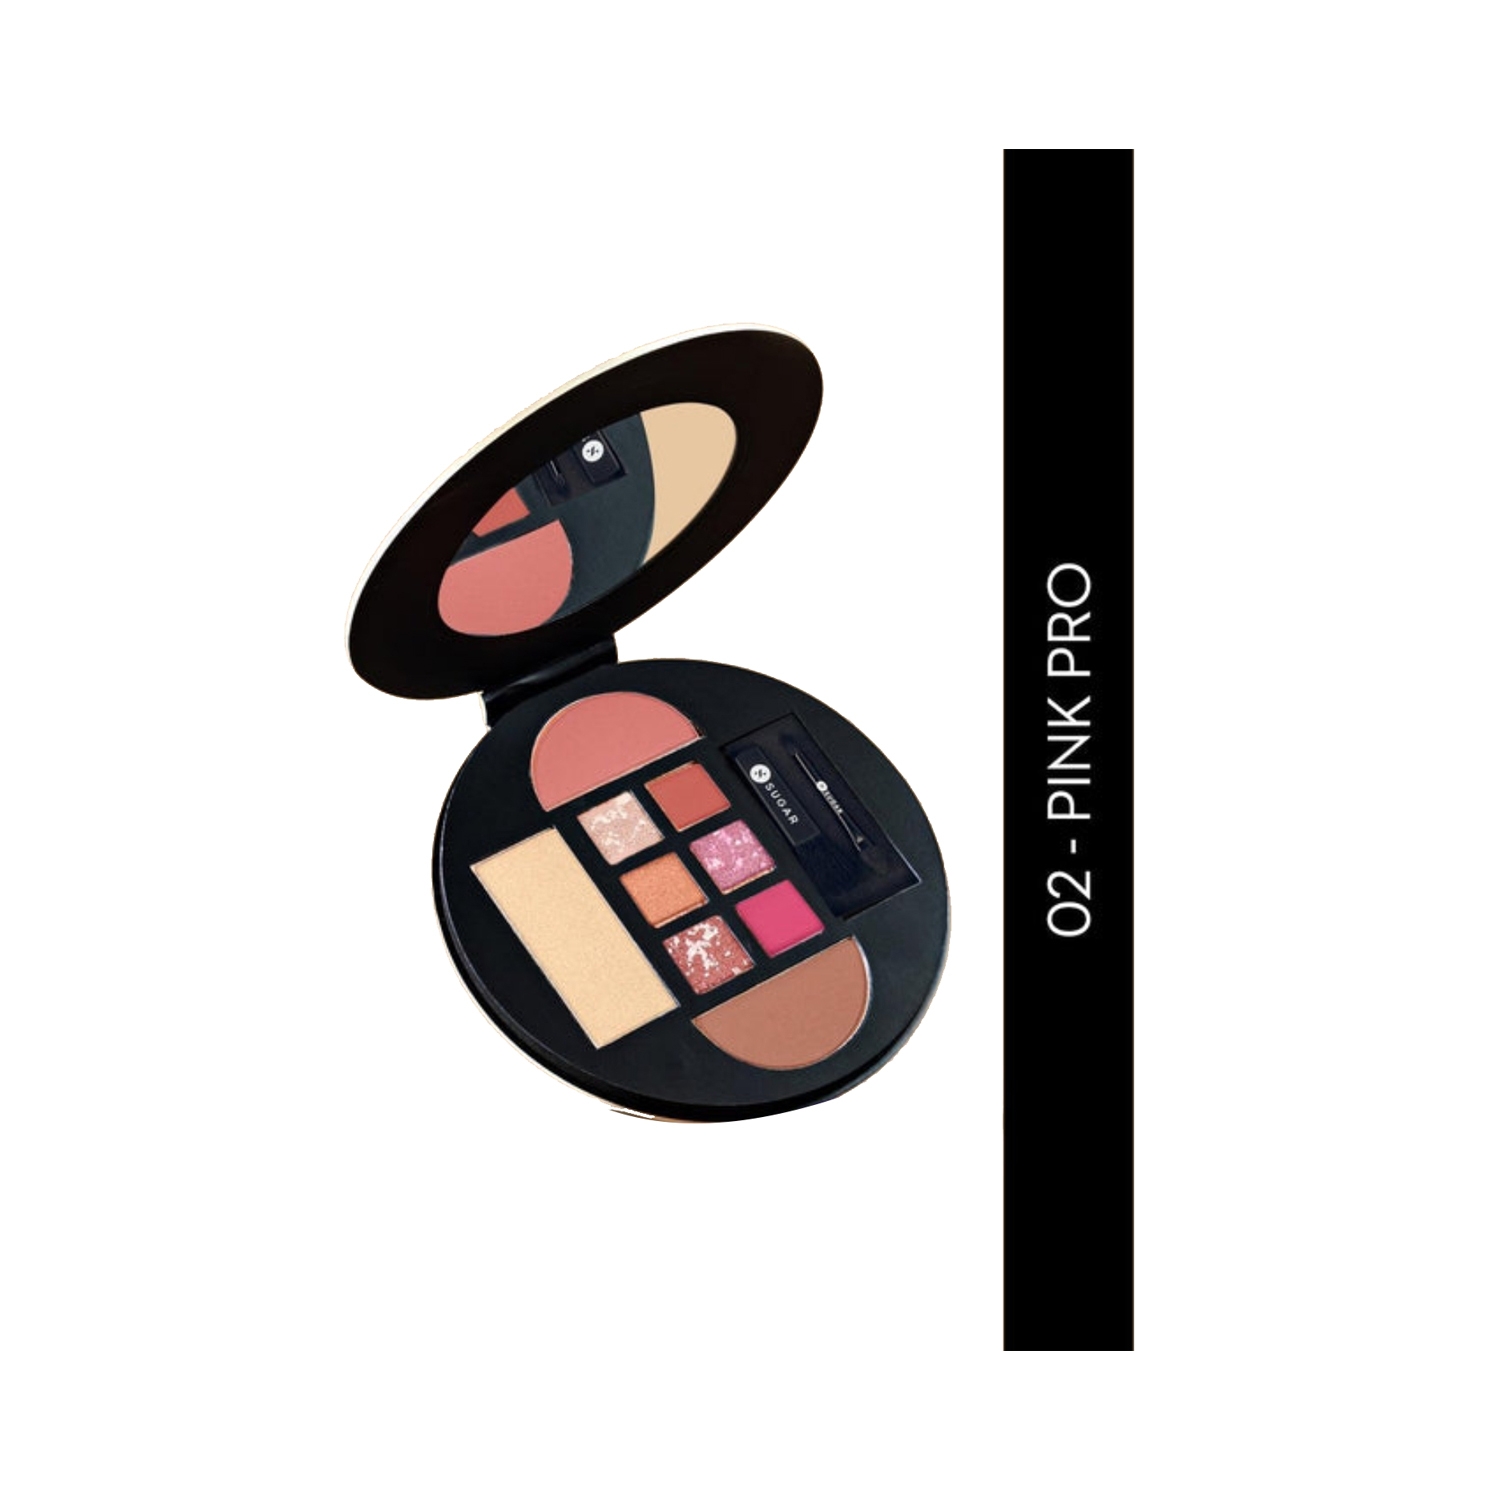 SUGAR Cosmetics | SUGAR Cosmetics Contour De Force Eyes And Face Palette - 02 Pink Pro (20.3g)